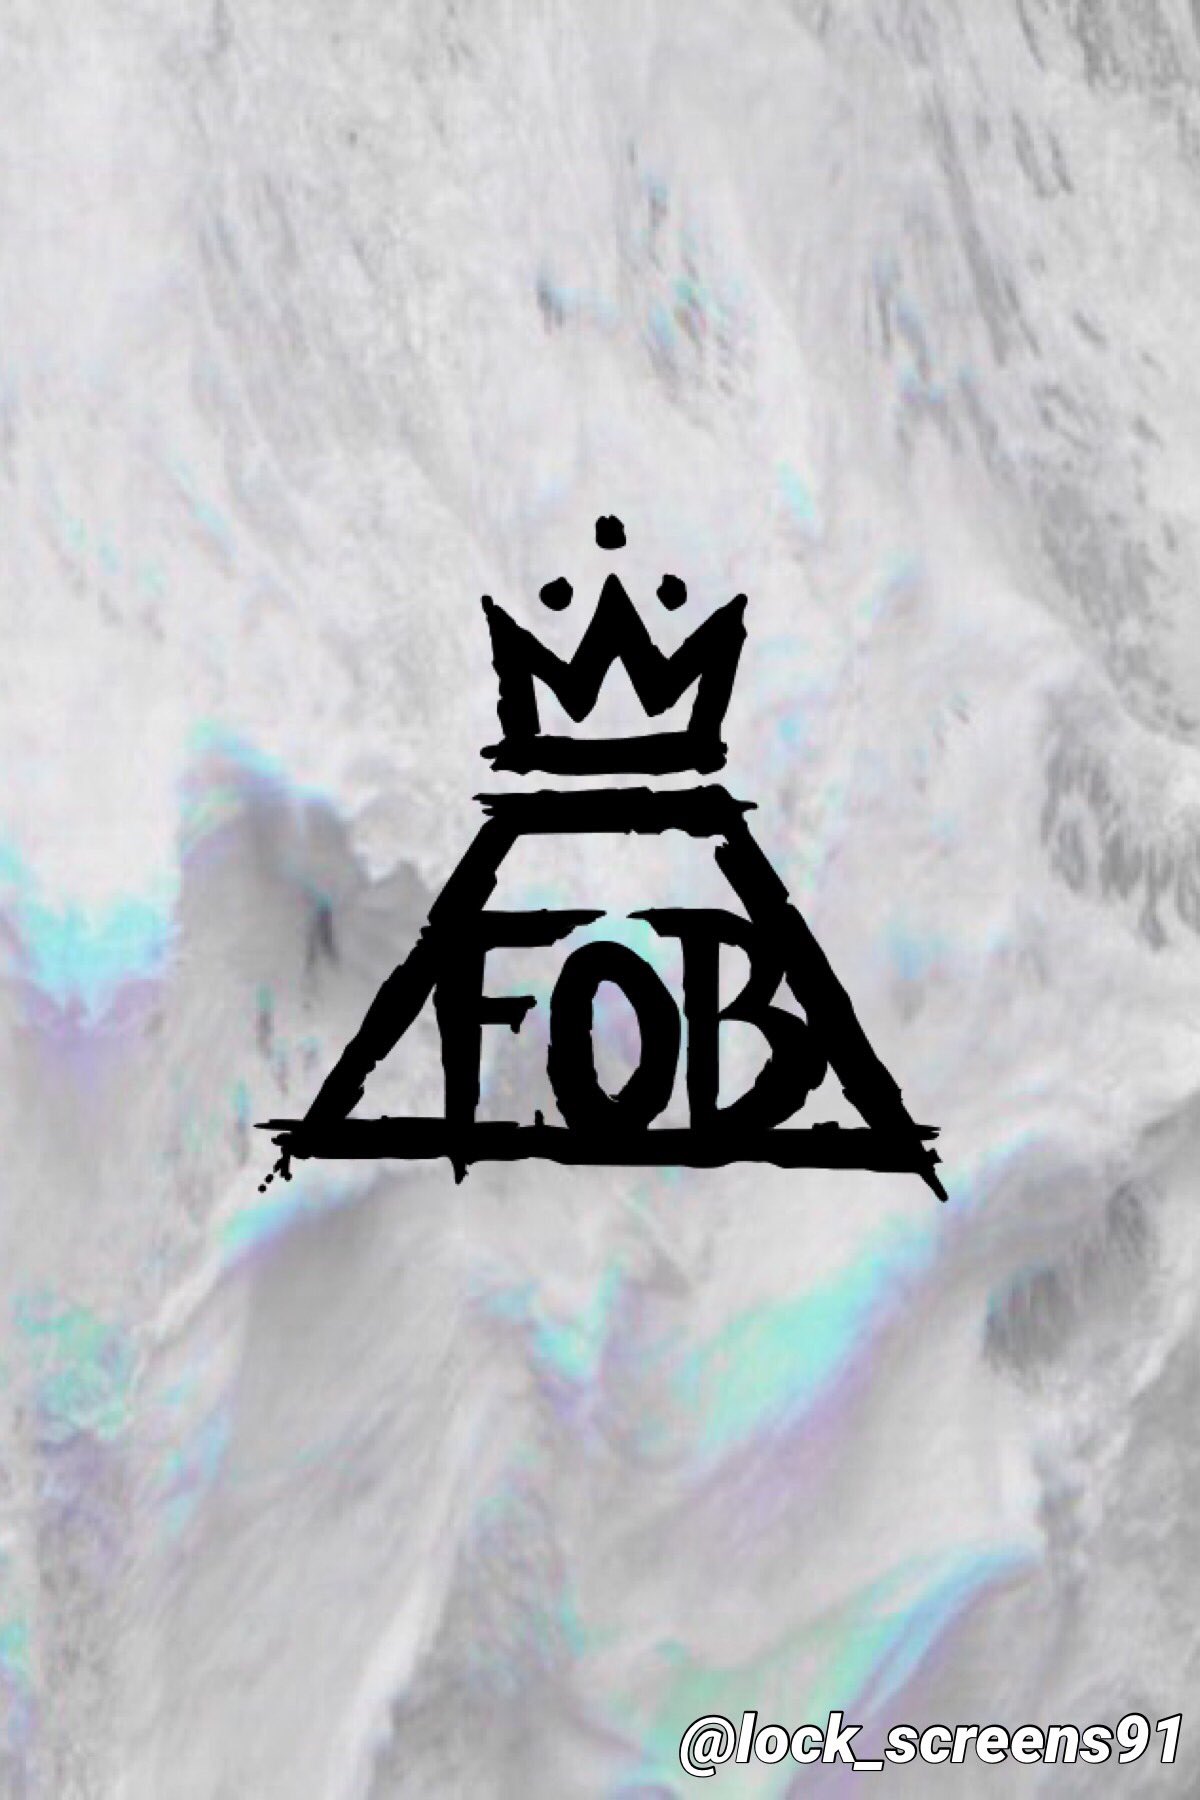 Band wallpapers on falloutboy fob wallpaper iphone httpstcobxwwharp